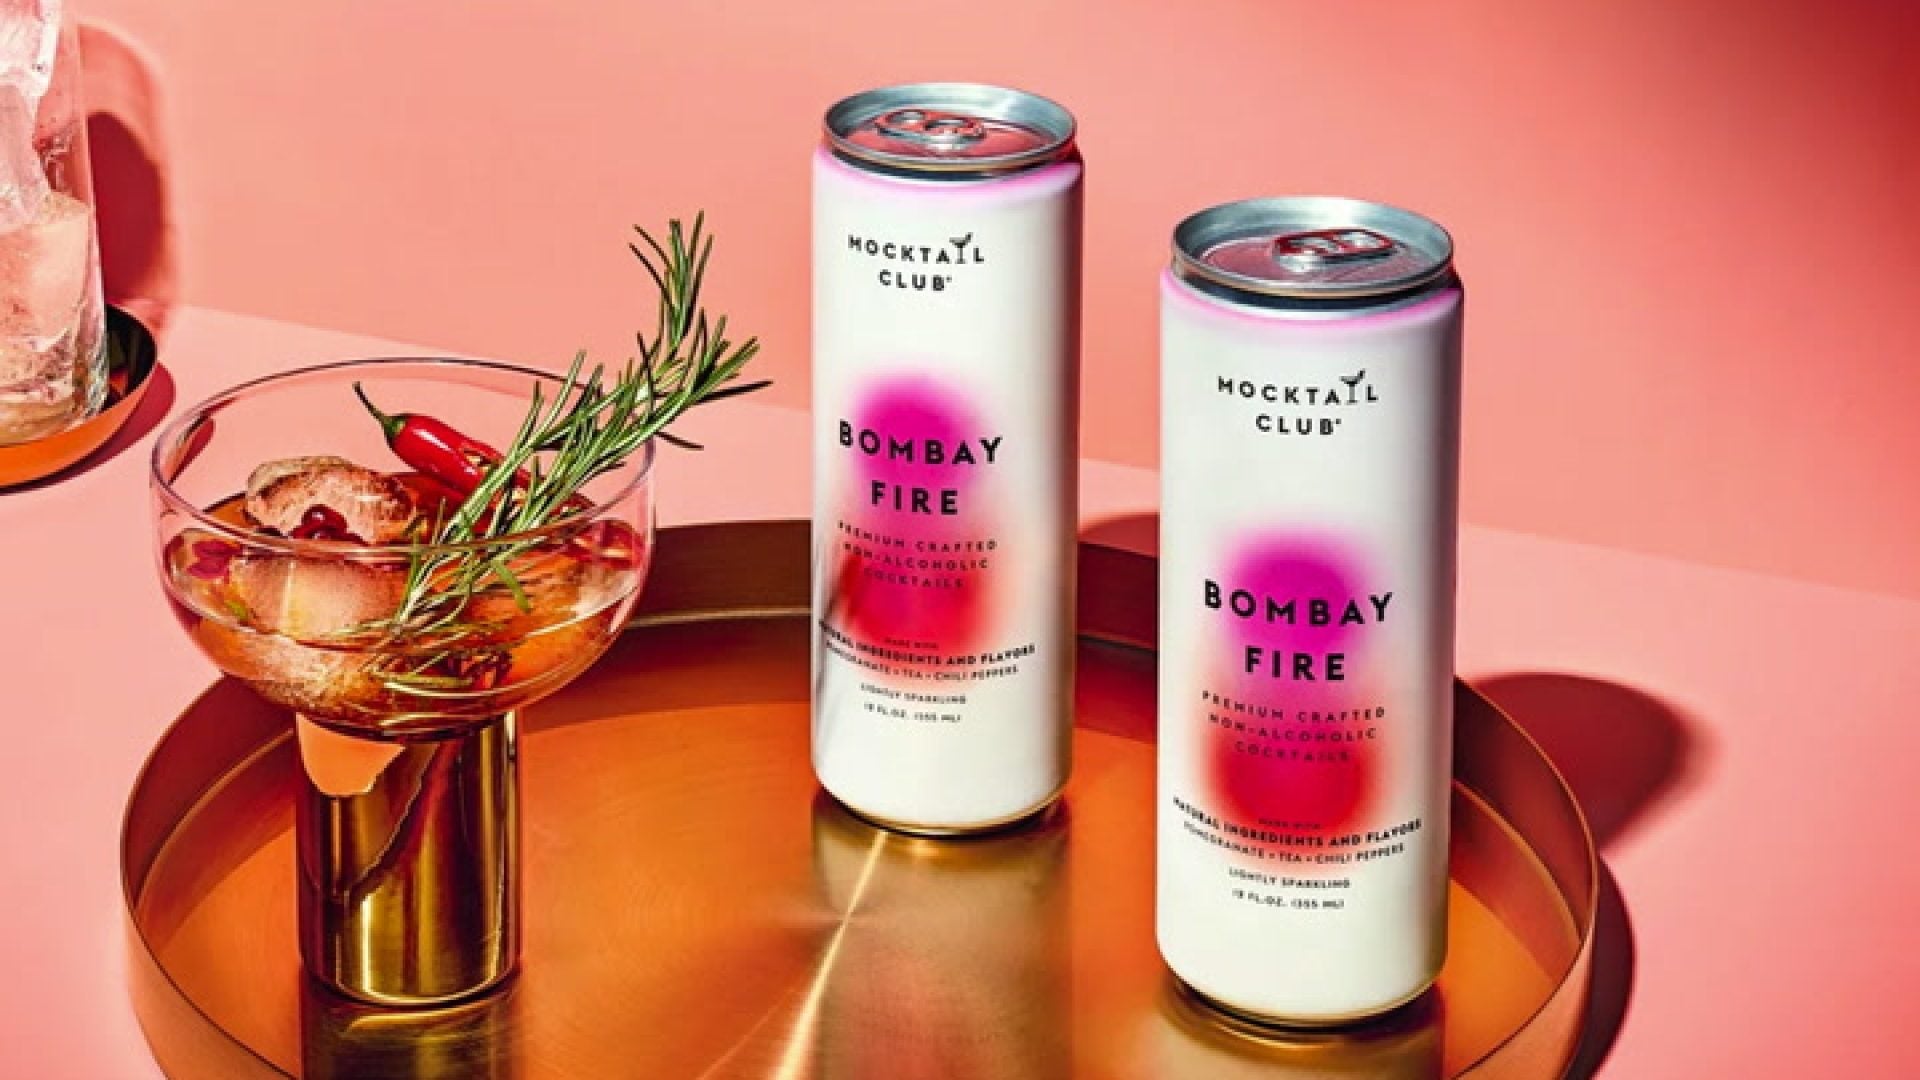 This Black Woman went from the corporate world to having her own Premium crafted non-alcoholic brand!